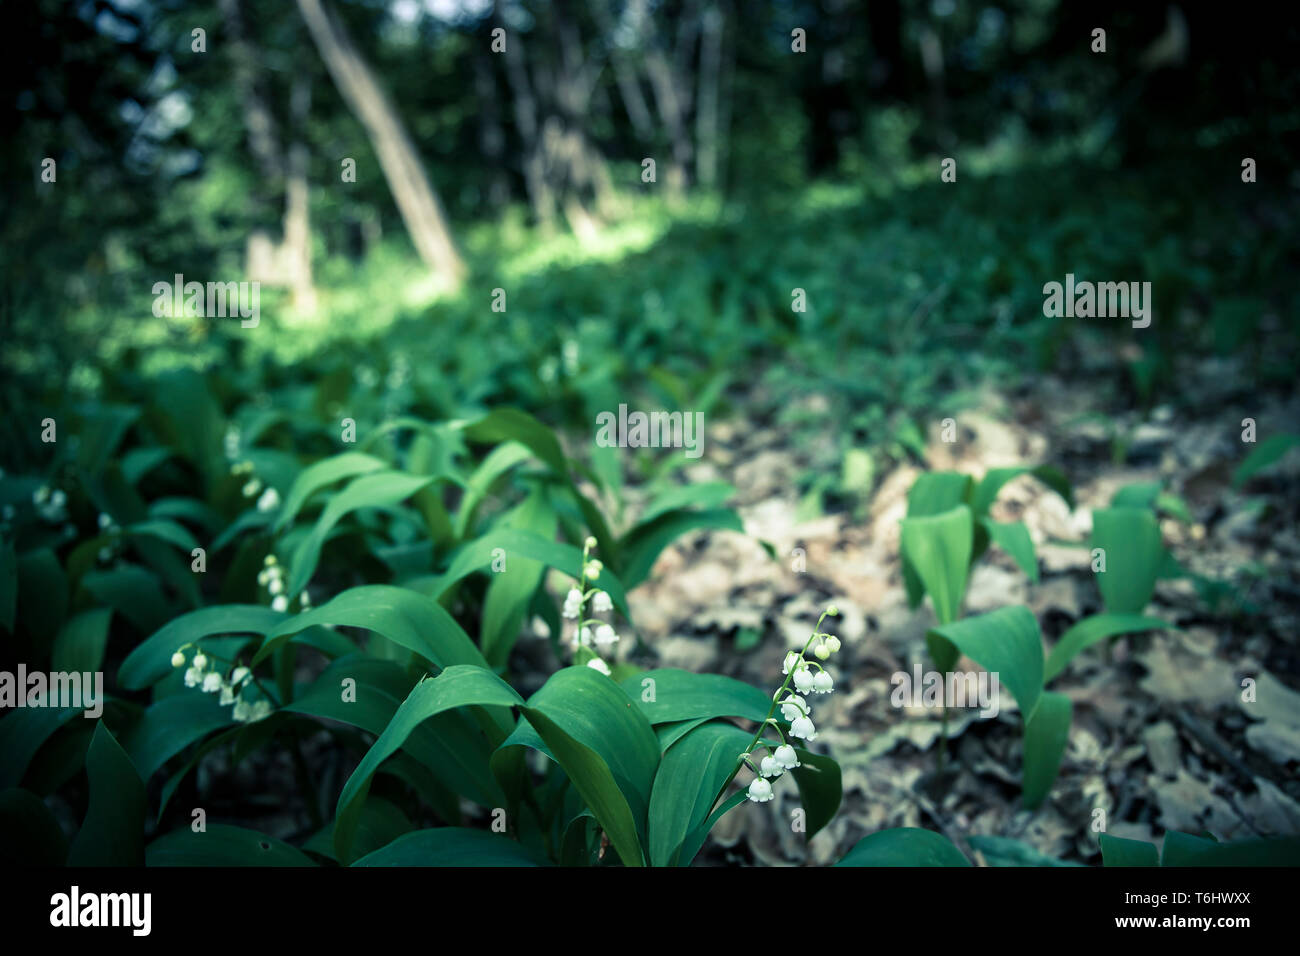 woodland landscape with low point of view and focus on the lily of the valley flowers in the foreground (Convallaria majalis). Parco Ticino, Italy. Stock Photo